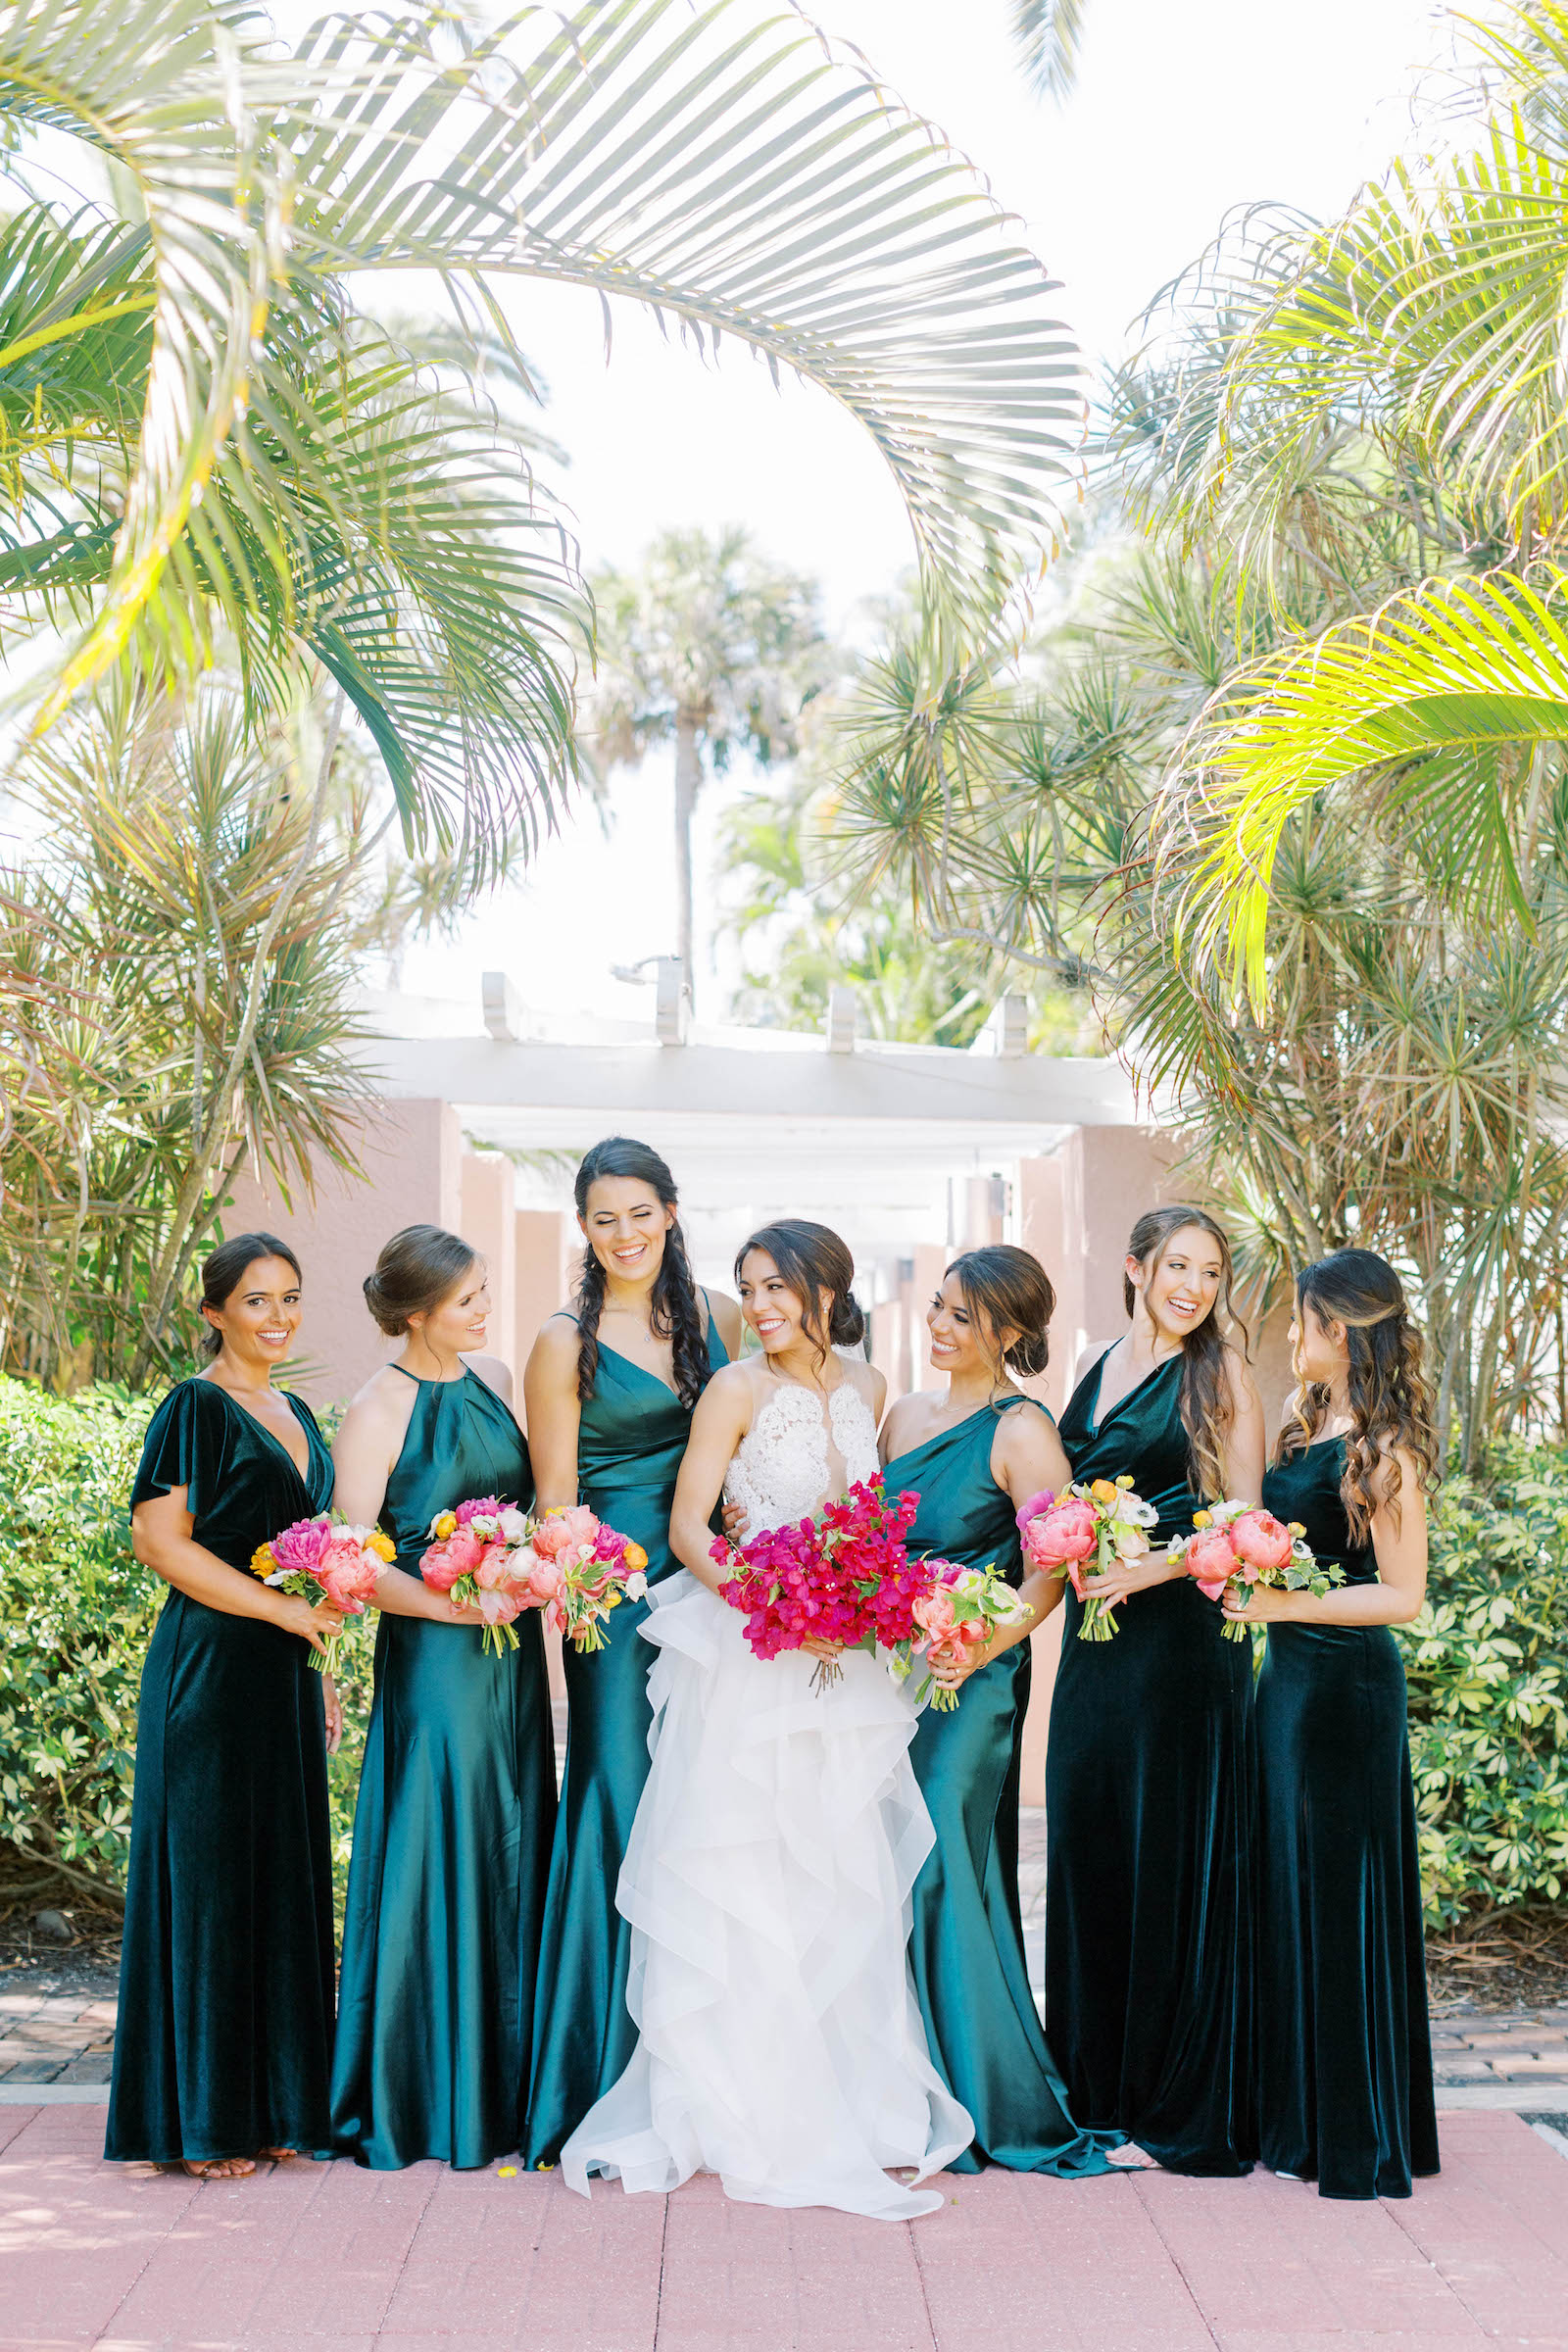 Vibrant Pink Wedding Bouquets with Mismatched Emerald Bridesmaids Dresses